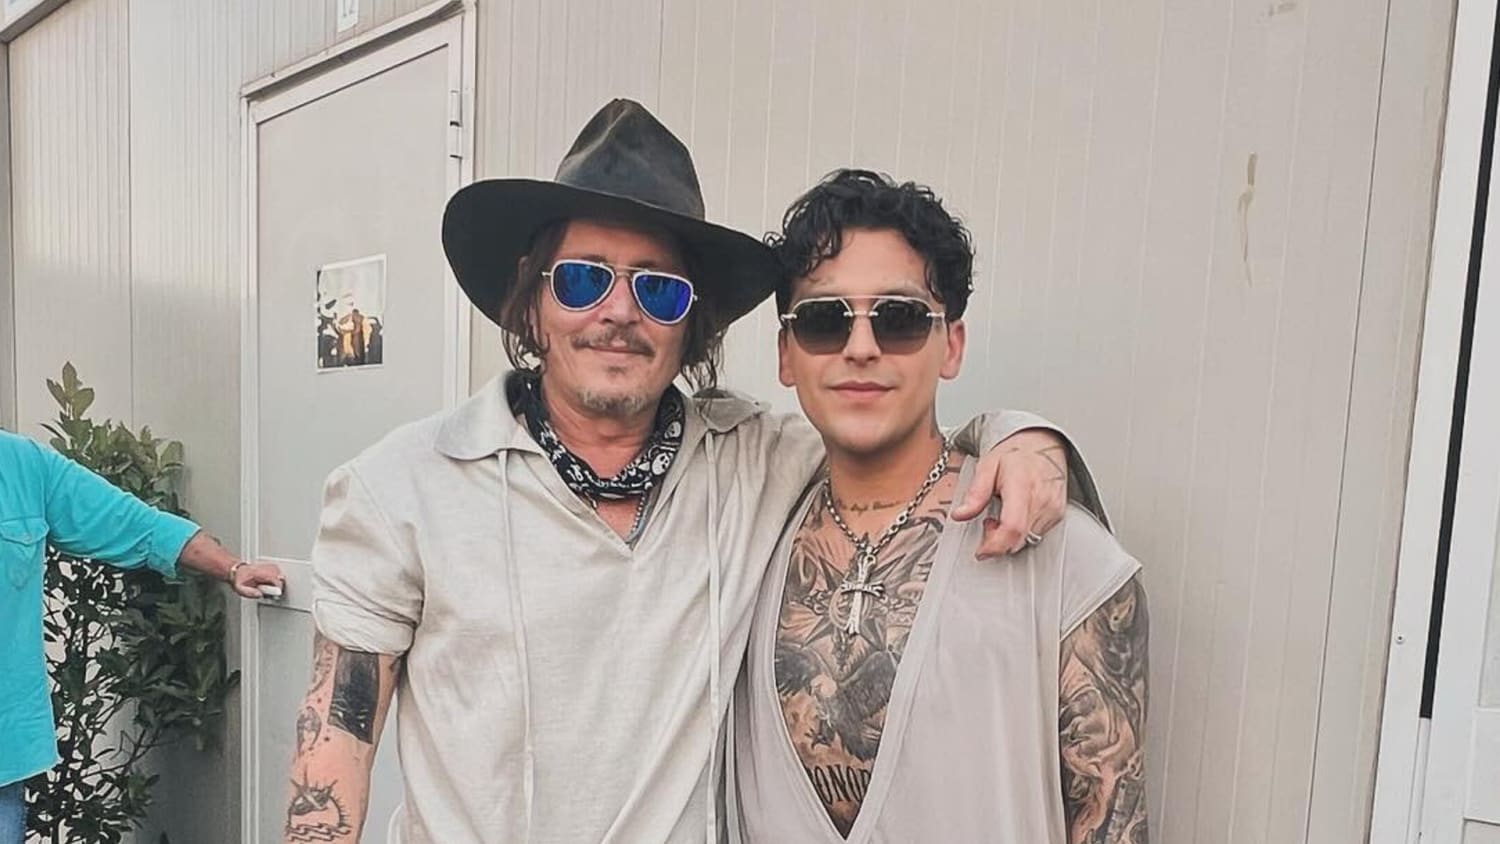 Christian Nodal meets Johnny Depp and they stand together